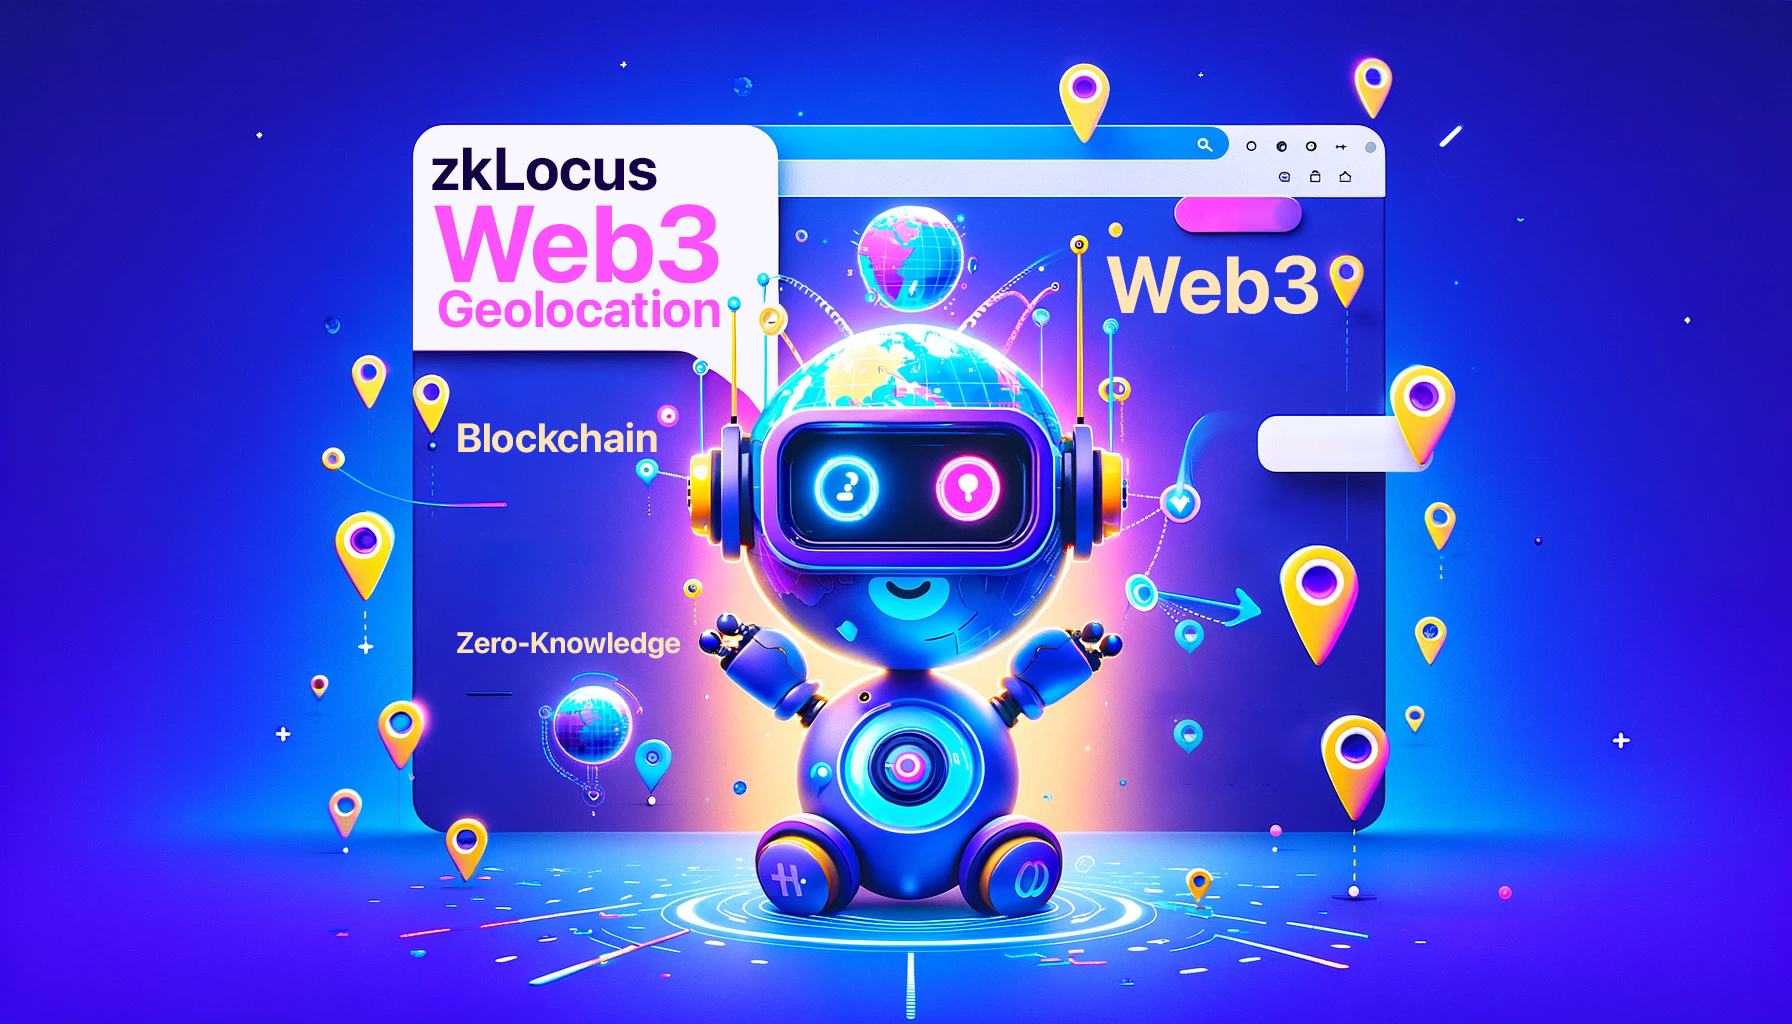 zkLocus is private and decentralized geolocation for Web3